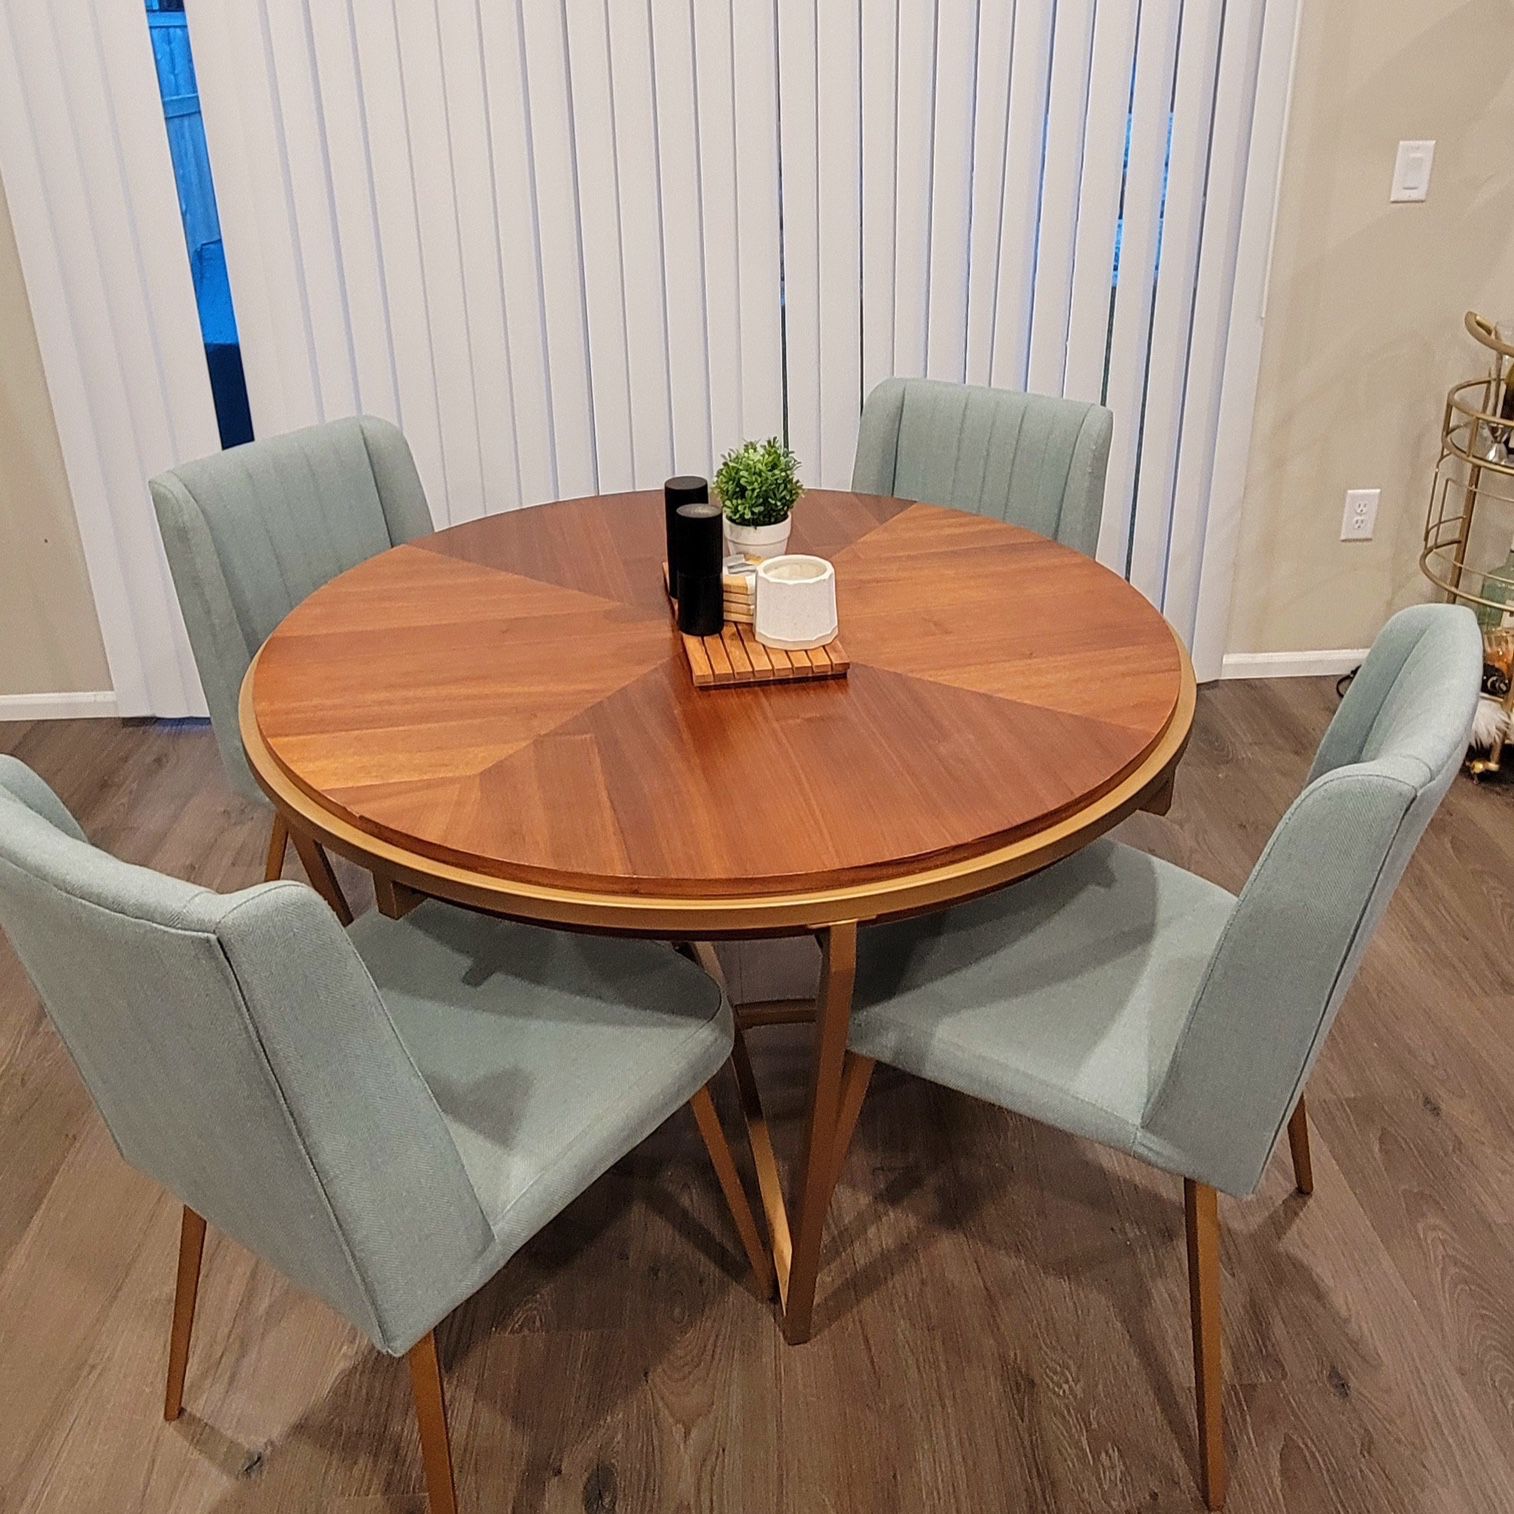 4 Person Dining Table Set